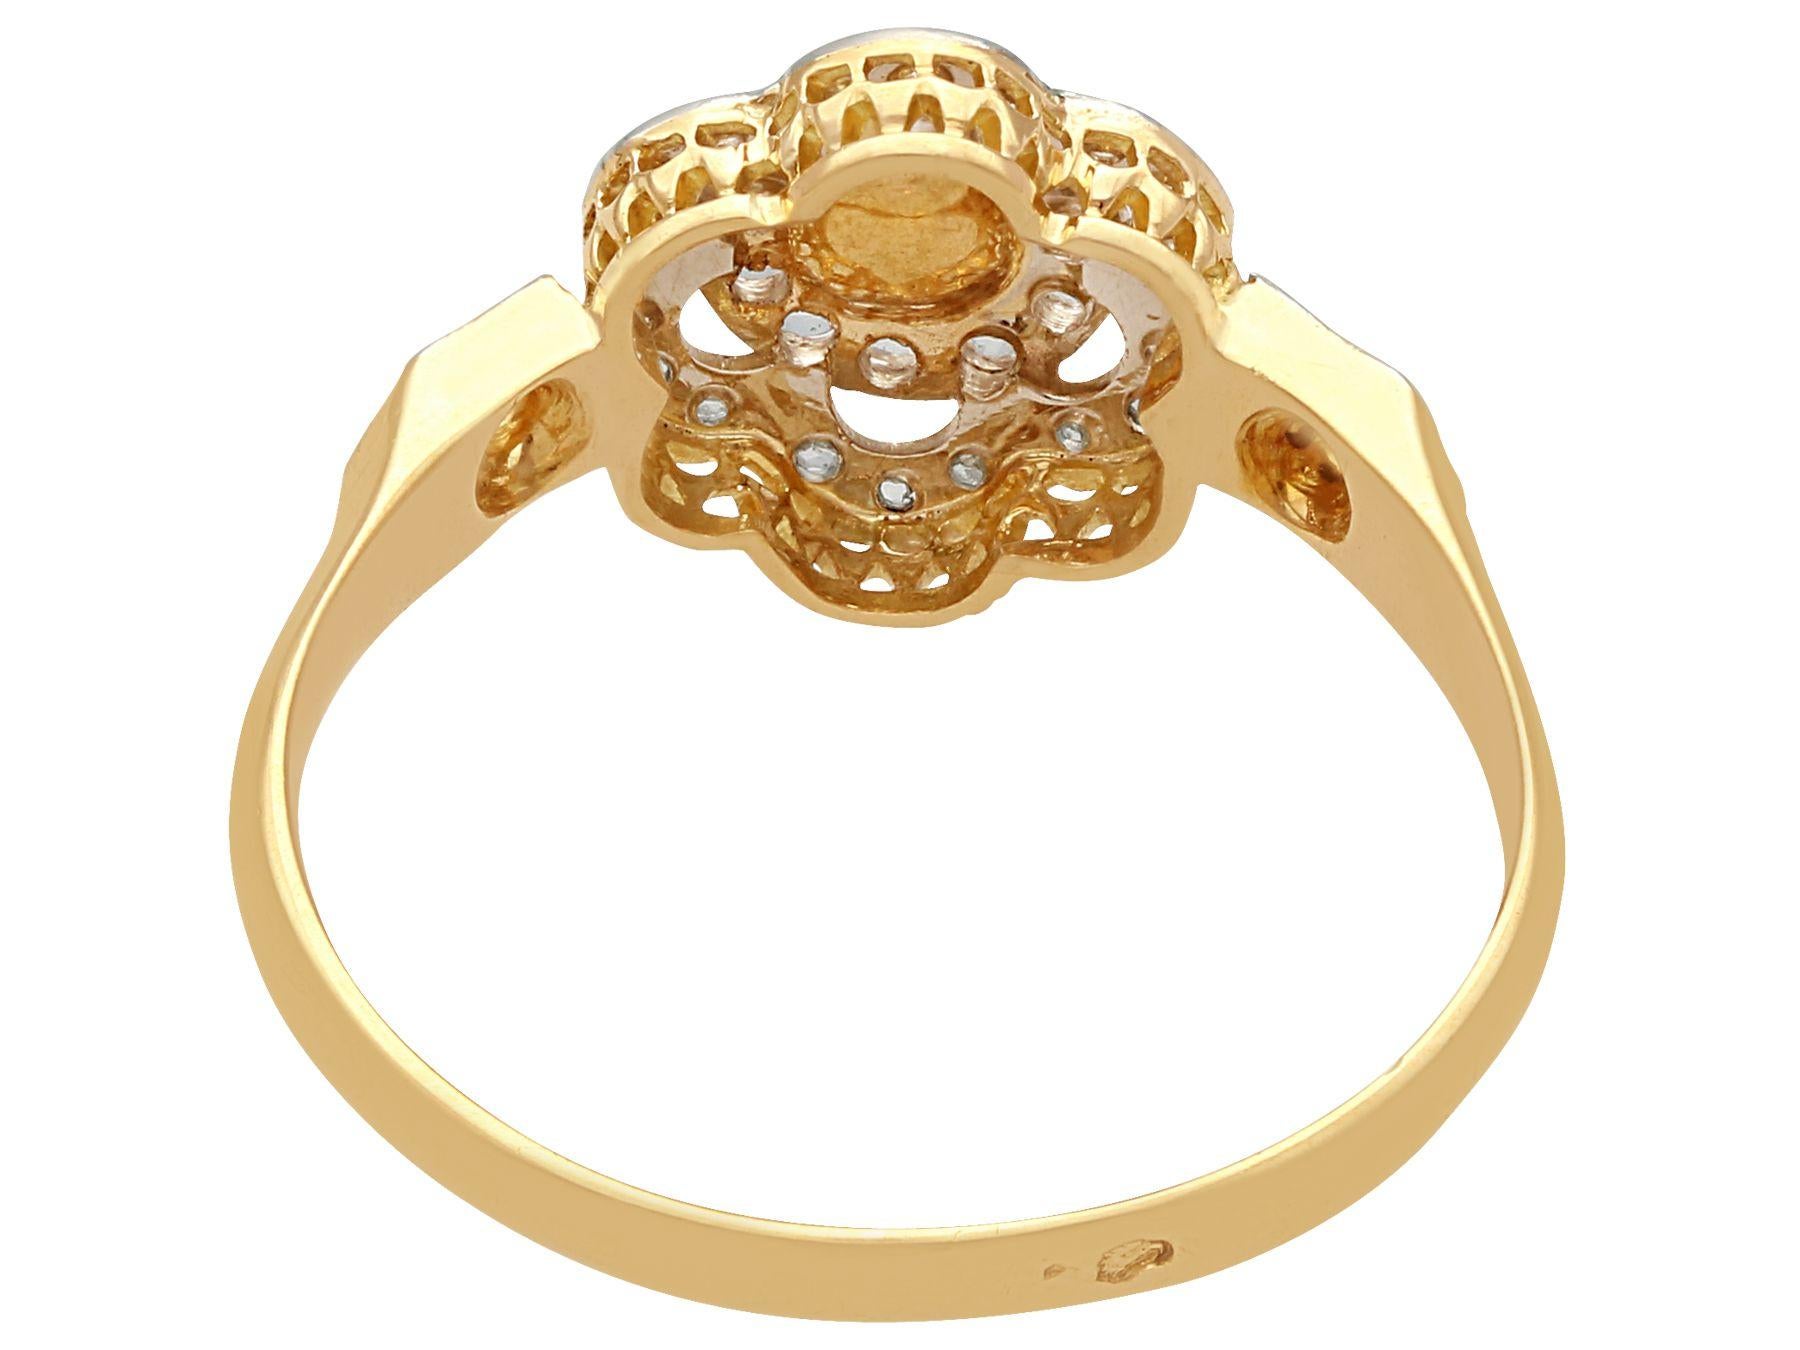 French Seed Pearl Diamond and Yellow Gold Cluster Ring In Excellent Condition For Sale In Jesmond, Newcastle Upon Tyne